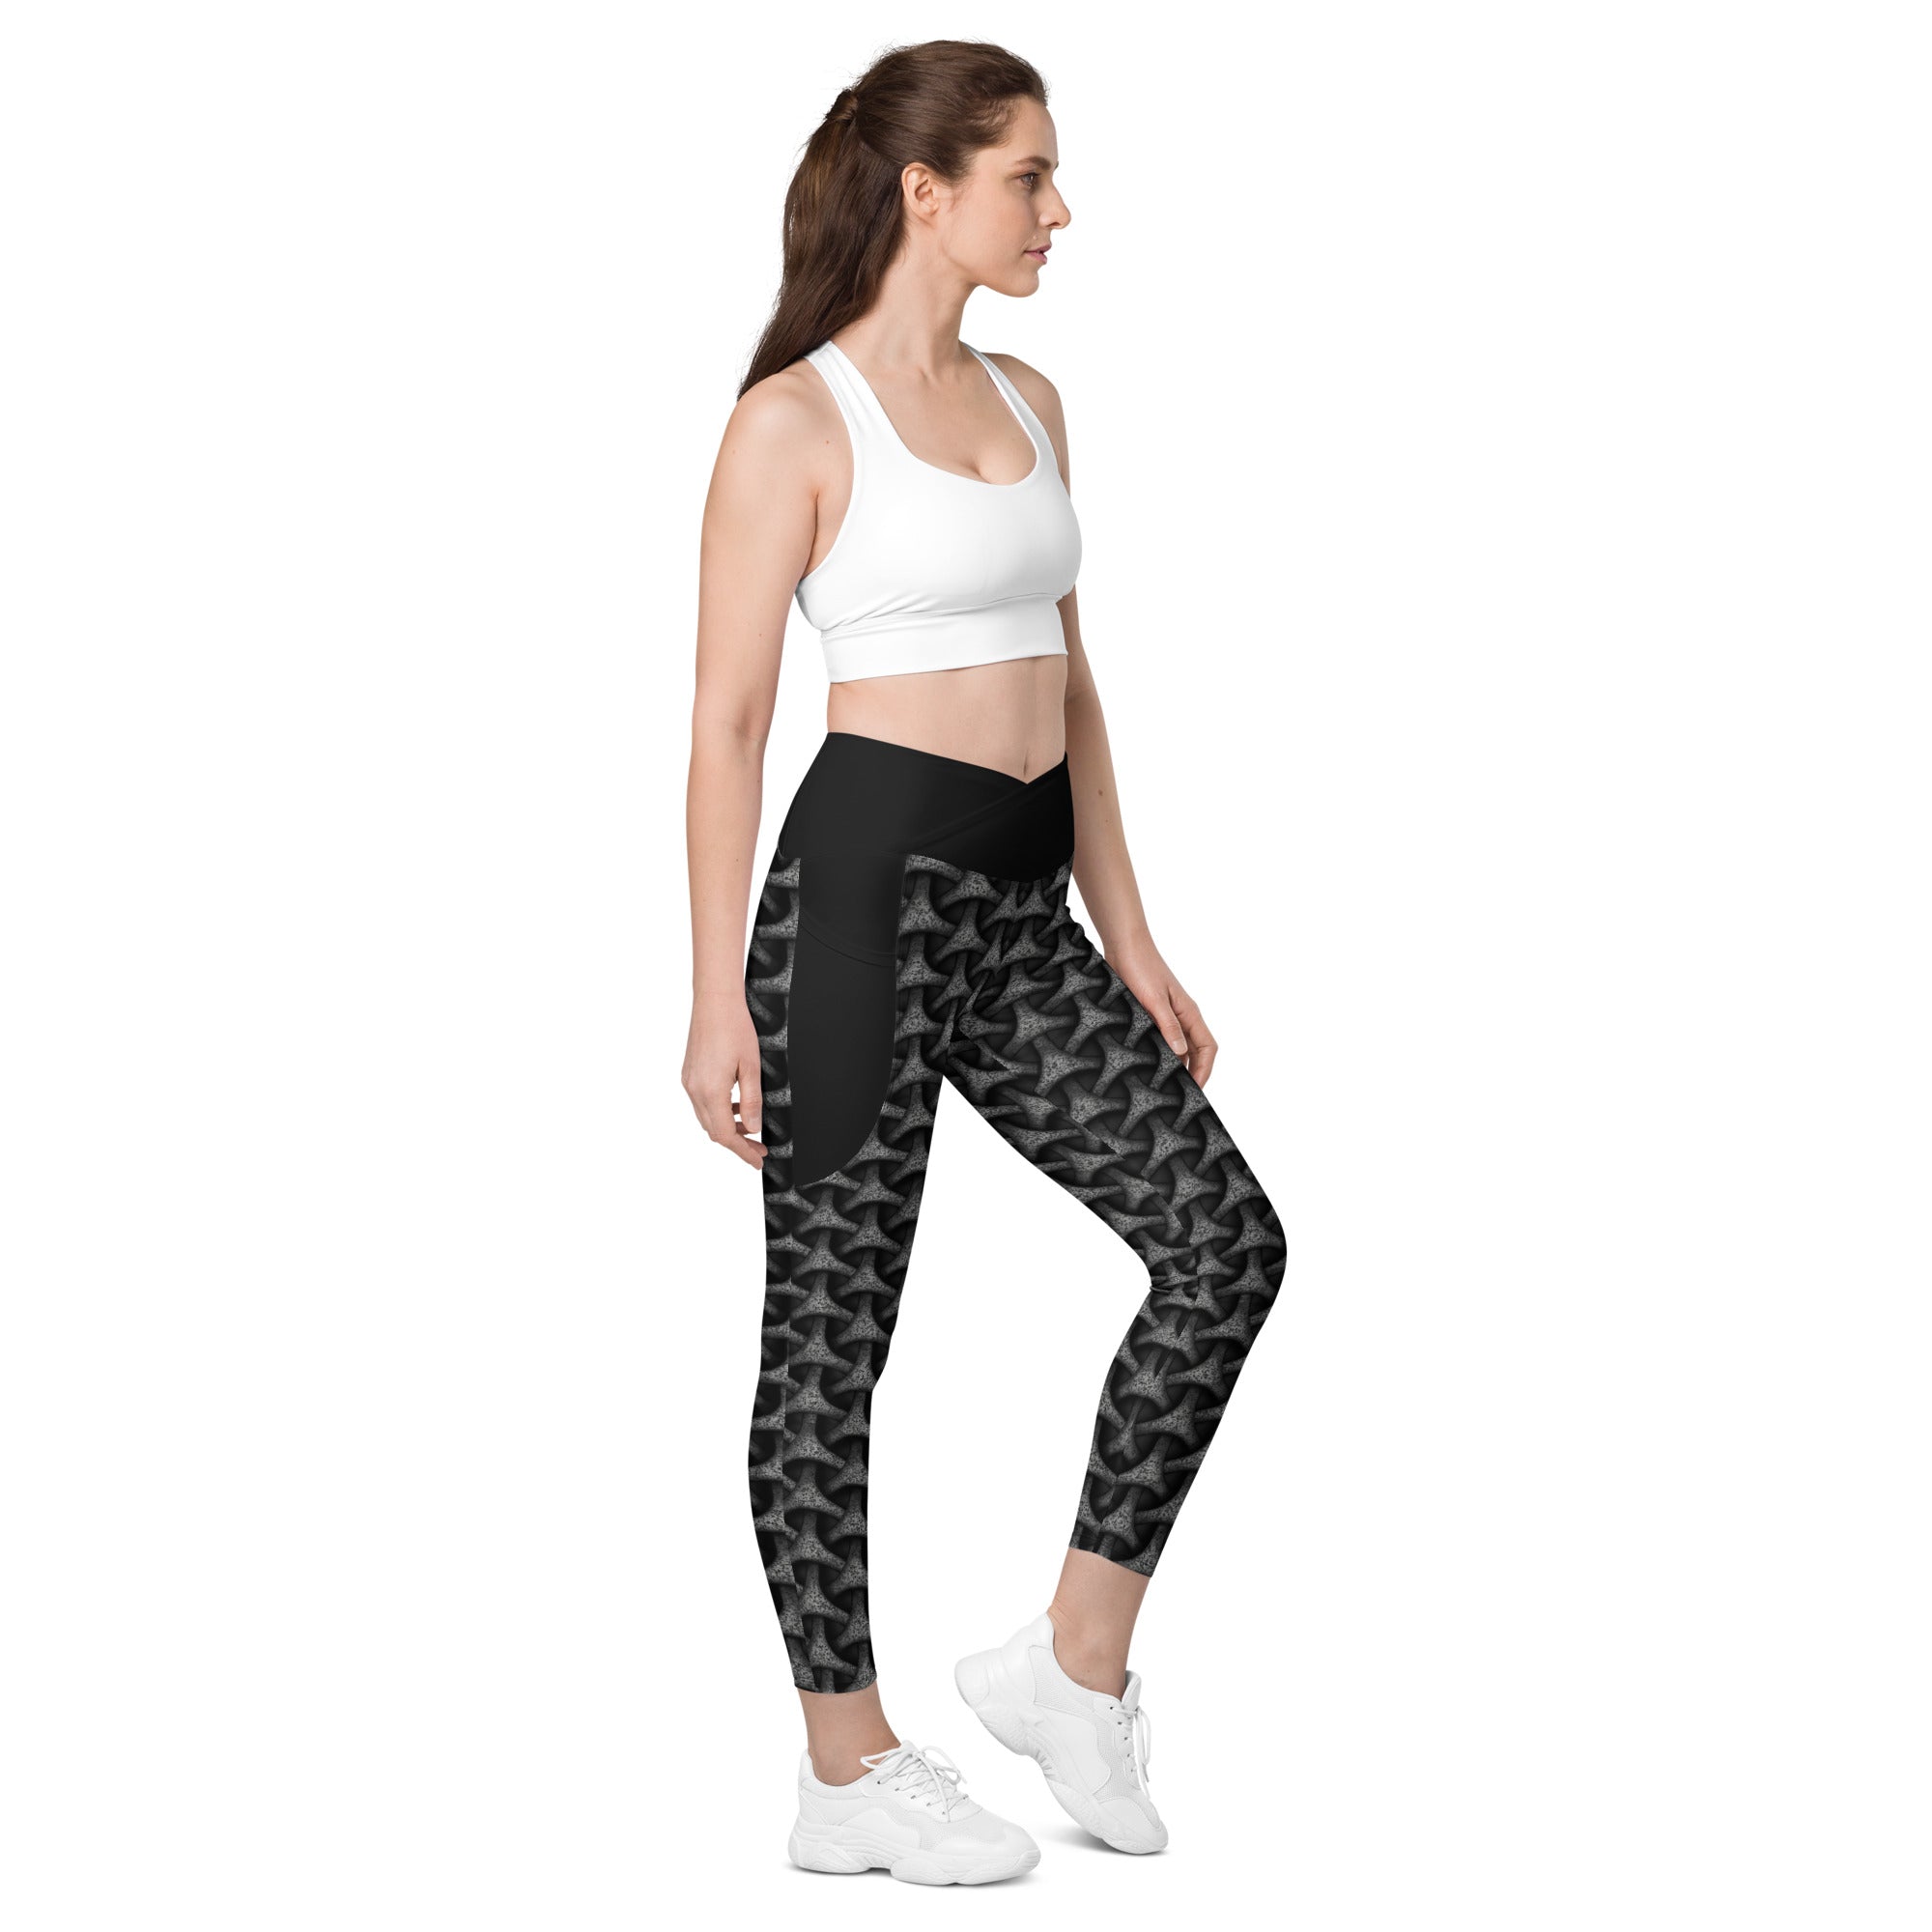 Pairing Nebula Dream Tristar Leggings with athletic sneakers for a run.